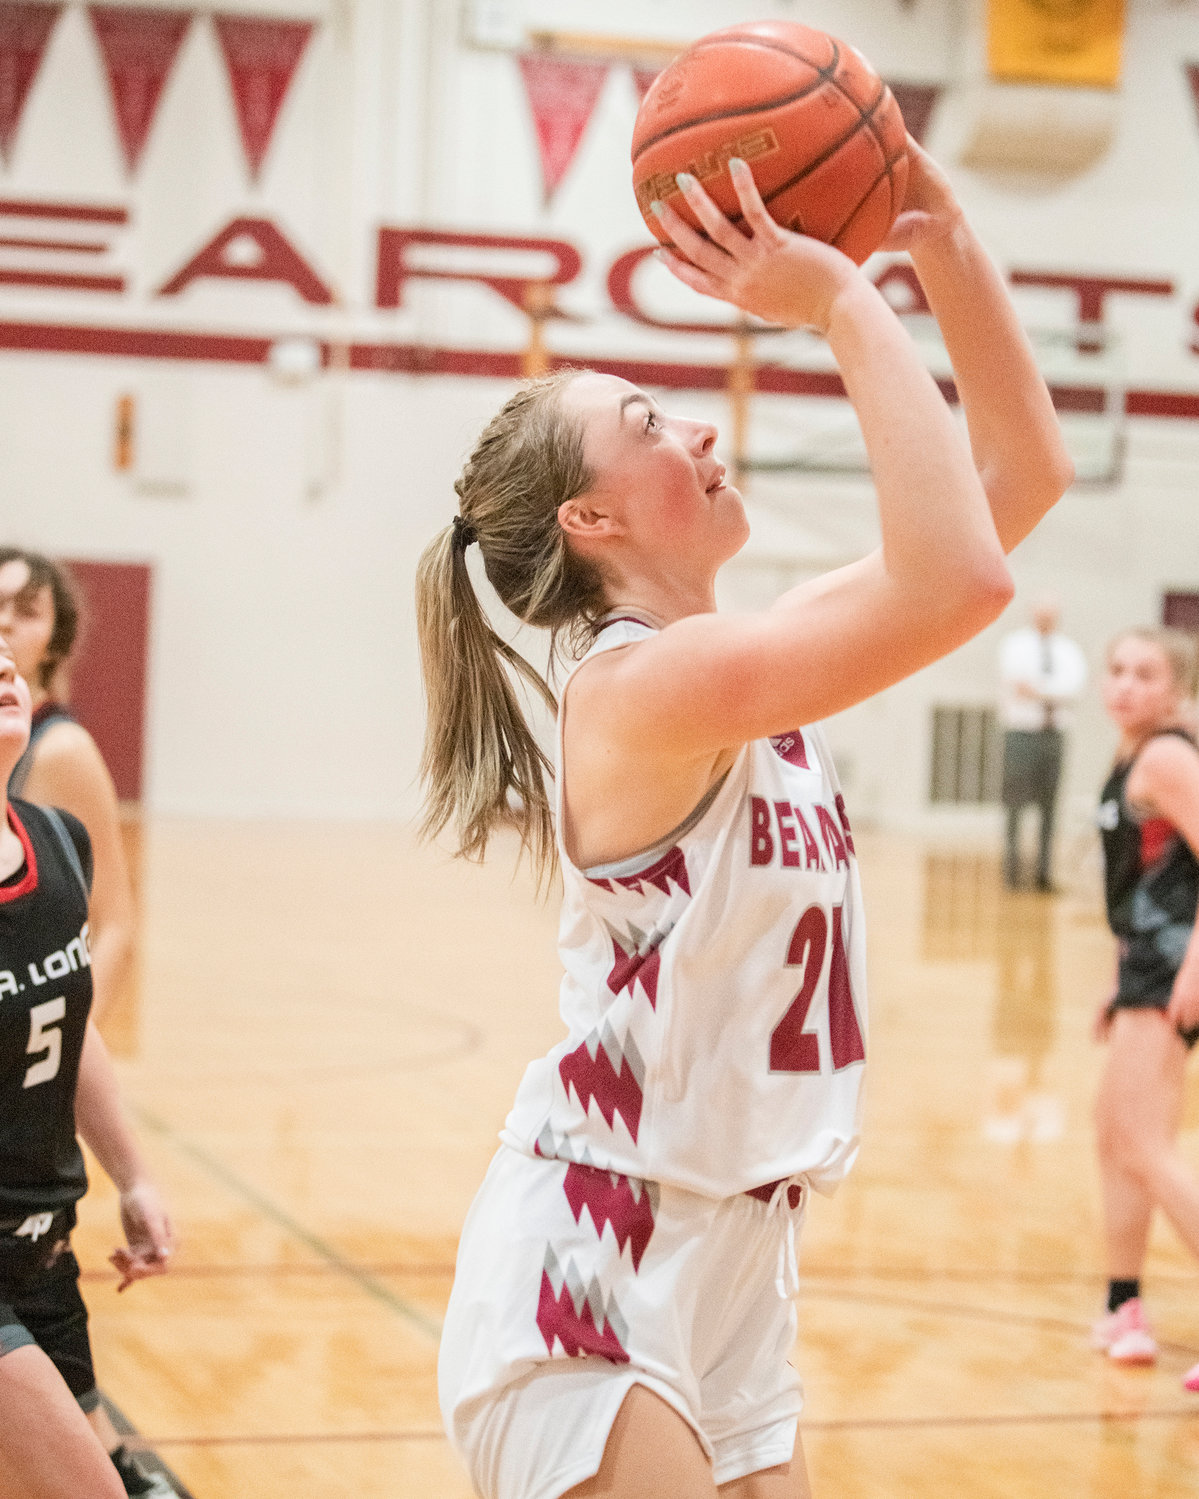 Bearcat senior Morgan Rogerson (21) scores Tuesday night during a game against R.A. Long at W.F. West High Shool in Chehalis.